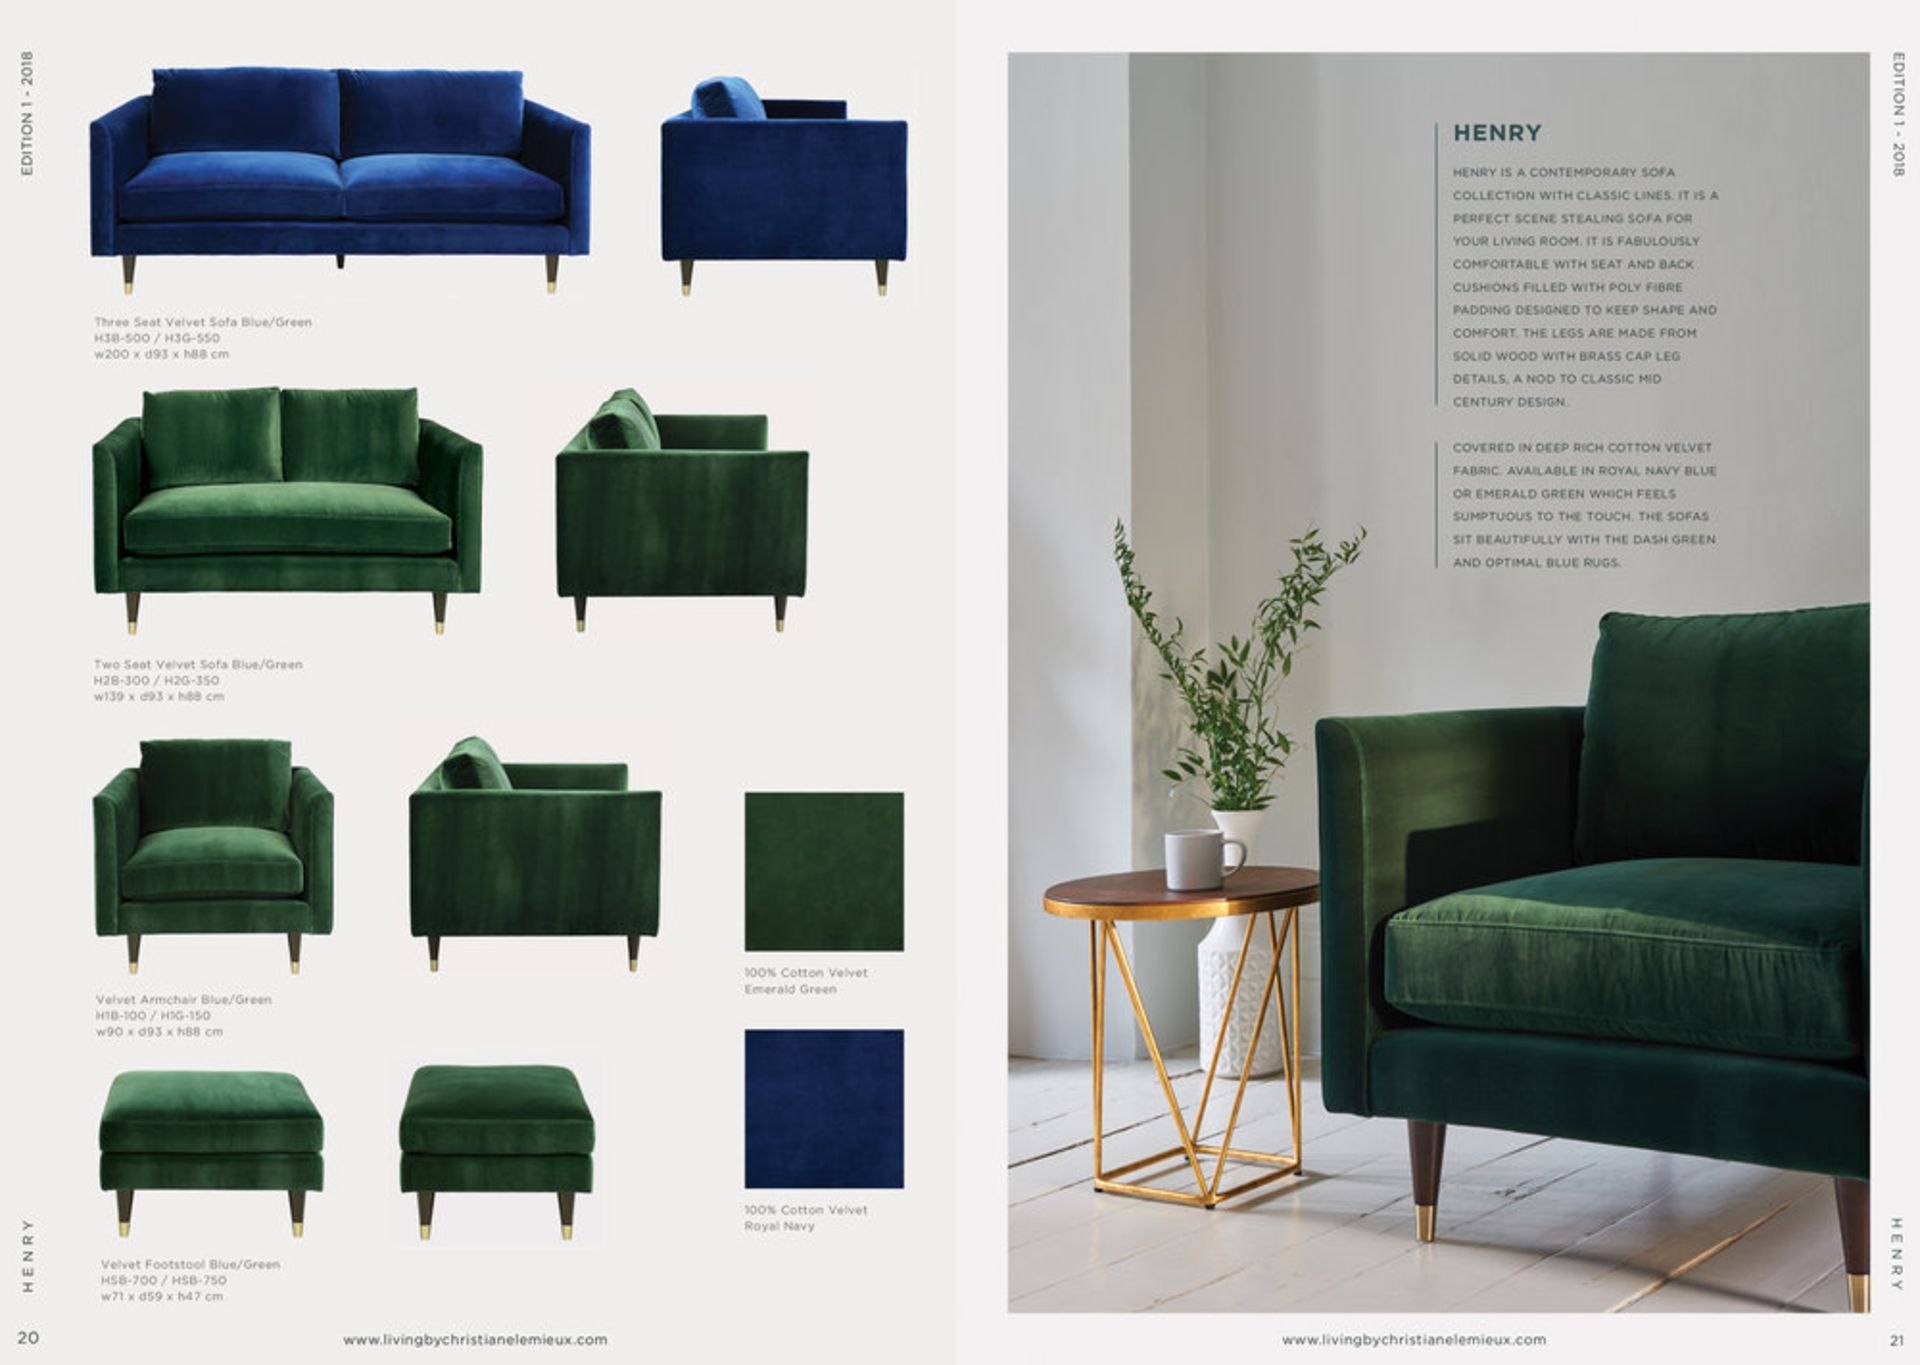 Henry Velvet Armchair Navy Blue Henry by Christiane Lemieux is a contemporary sofa and armchair - Image 2 of 2